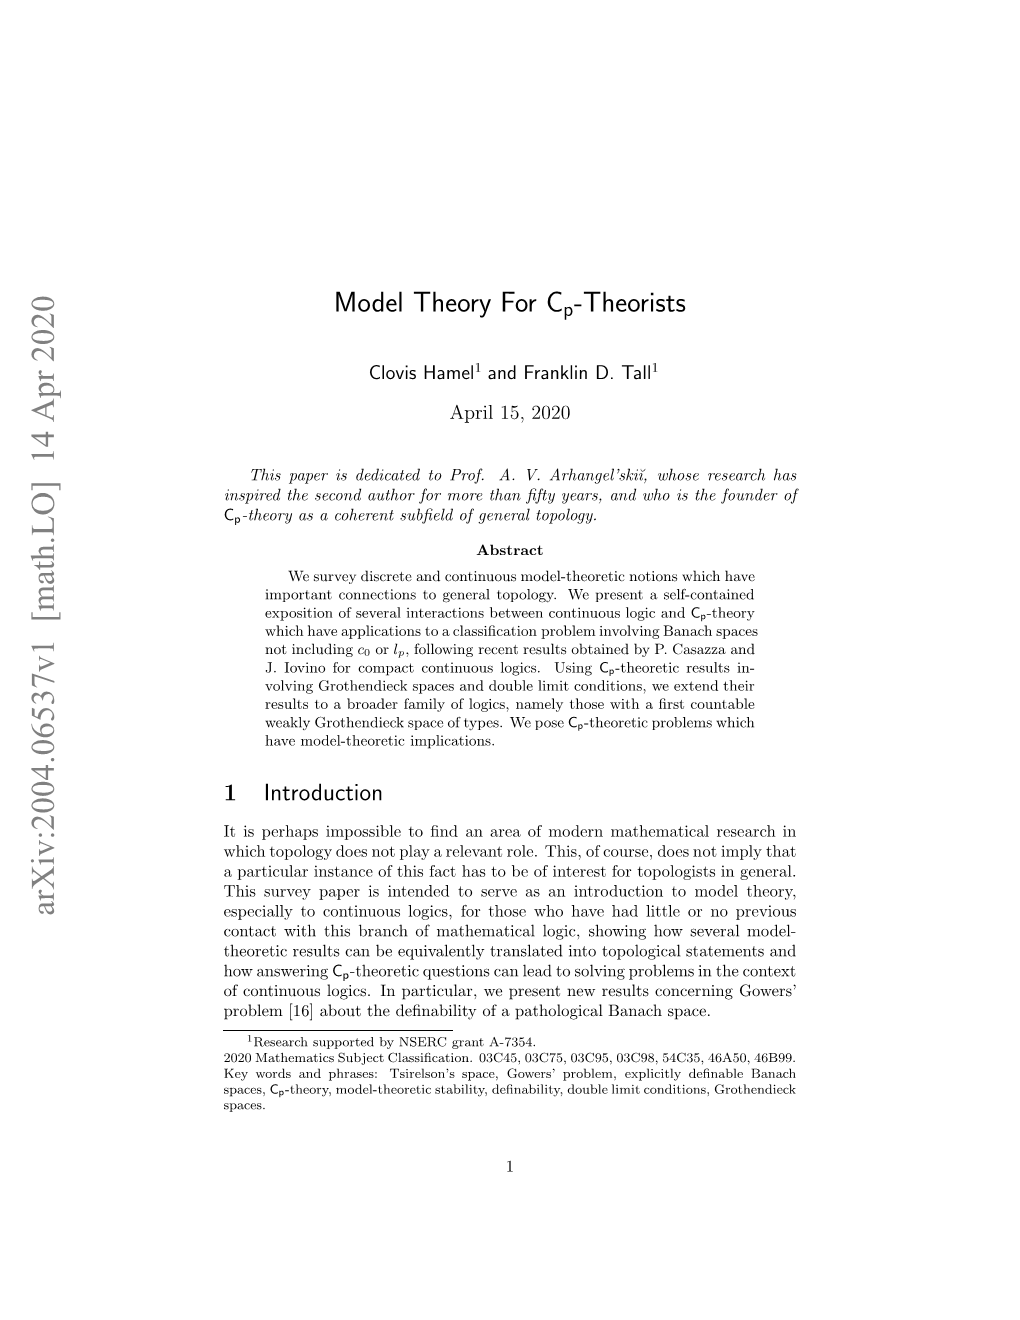 Model Theory for $ C P $-Theorists